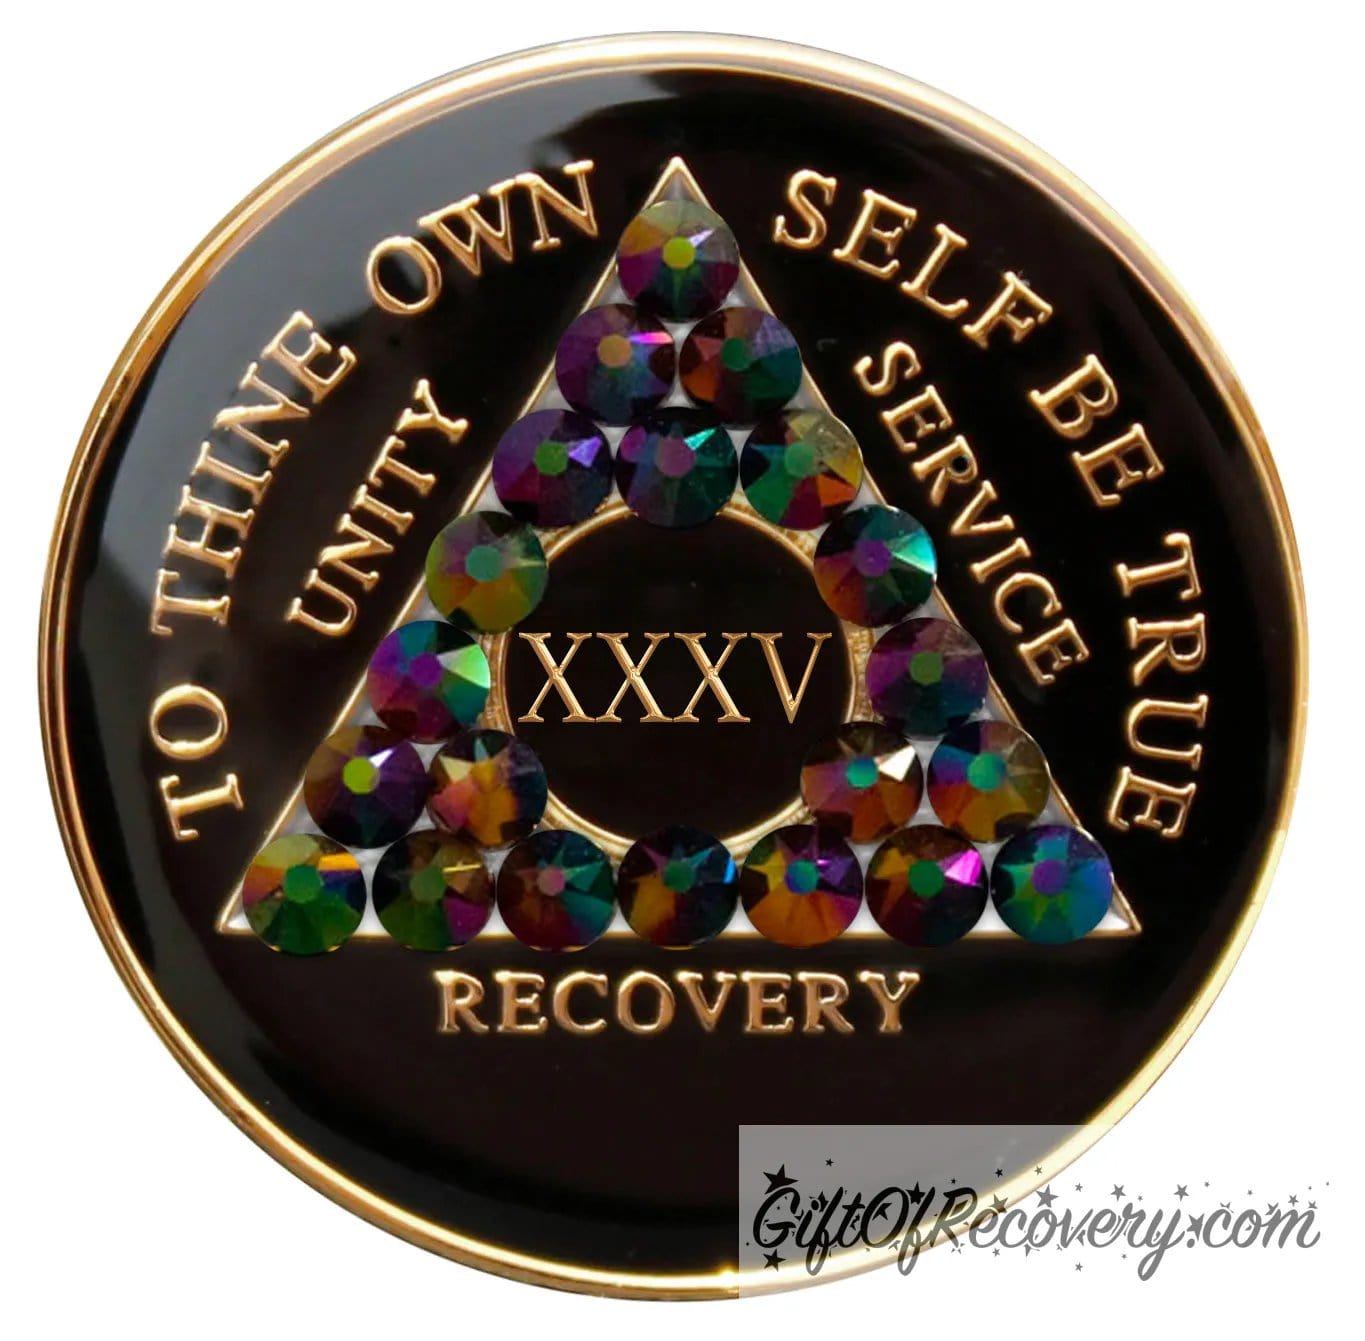 35 year black onyx AA recovery medallion, with 21 genuine peacock crystals, symbolizing the beauty and diversity of recovery journeys, the AA medallion has; to thine own self be true, unity, service, recovery, roman numeral, and the rim, embossed with 14k gold and sealed with resin for a glossy finish.